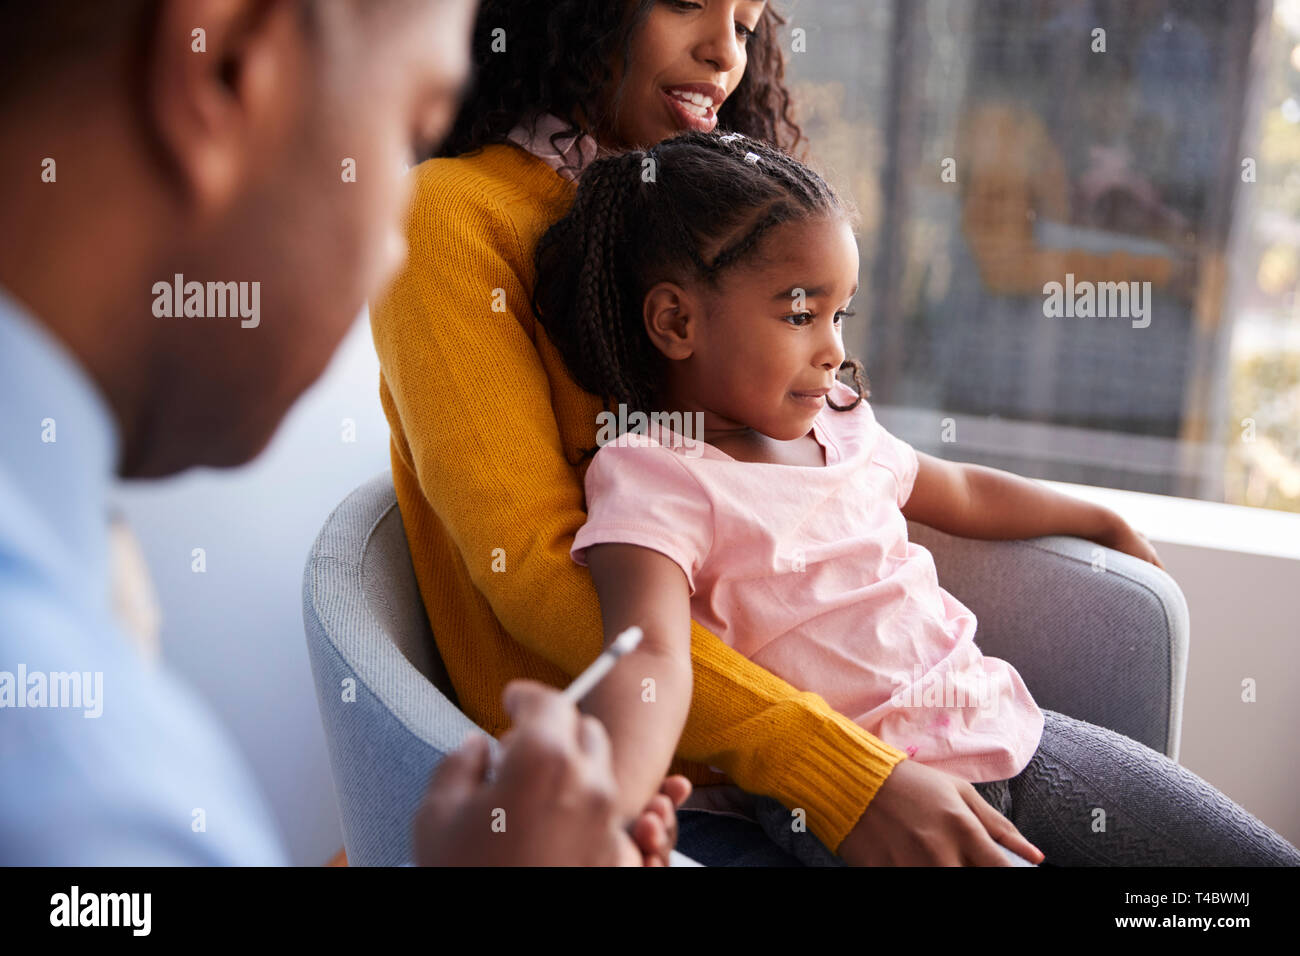 Mother Taking Young Daughter For Vaccination In Doctors Office Stock Photo